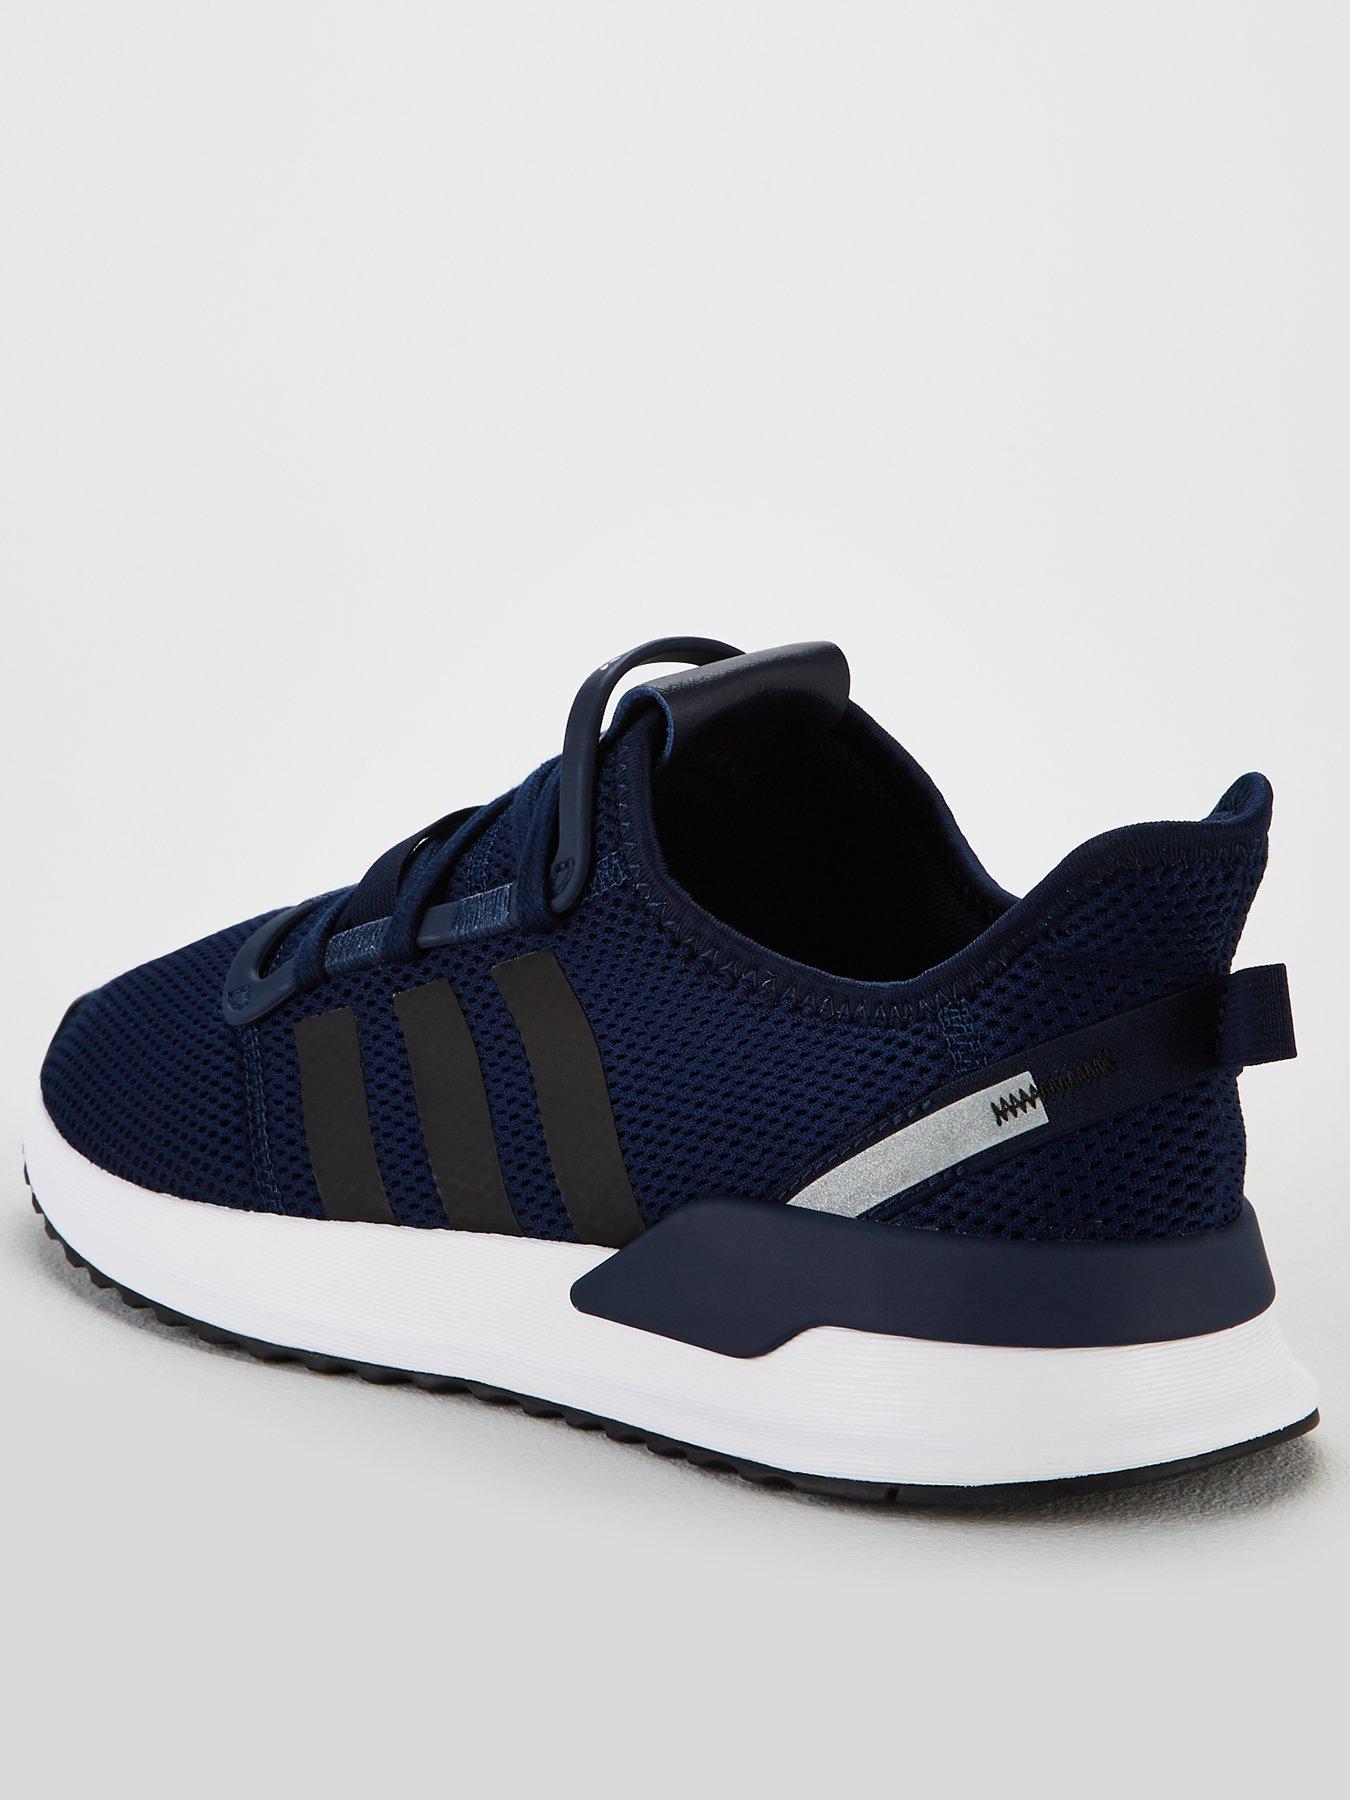 littlewoods mens adidas trainers